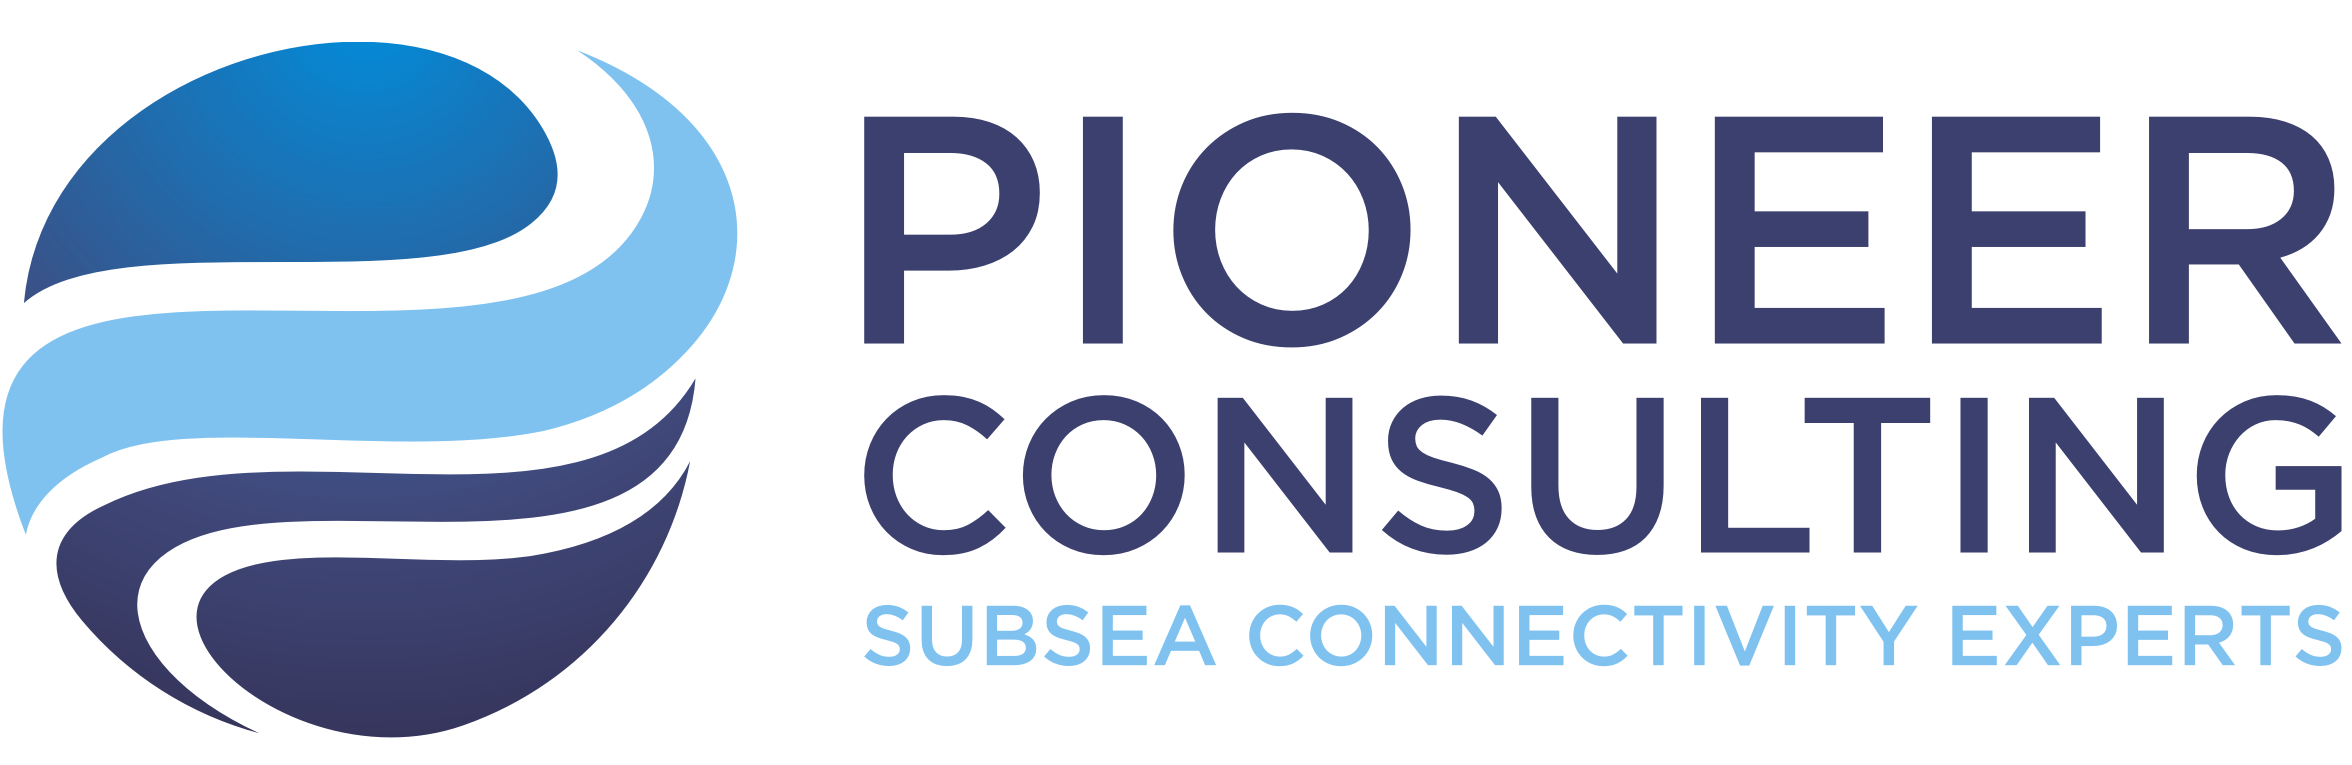 Pioneer Consulting logo